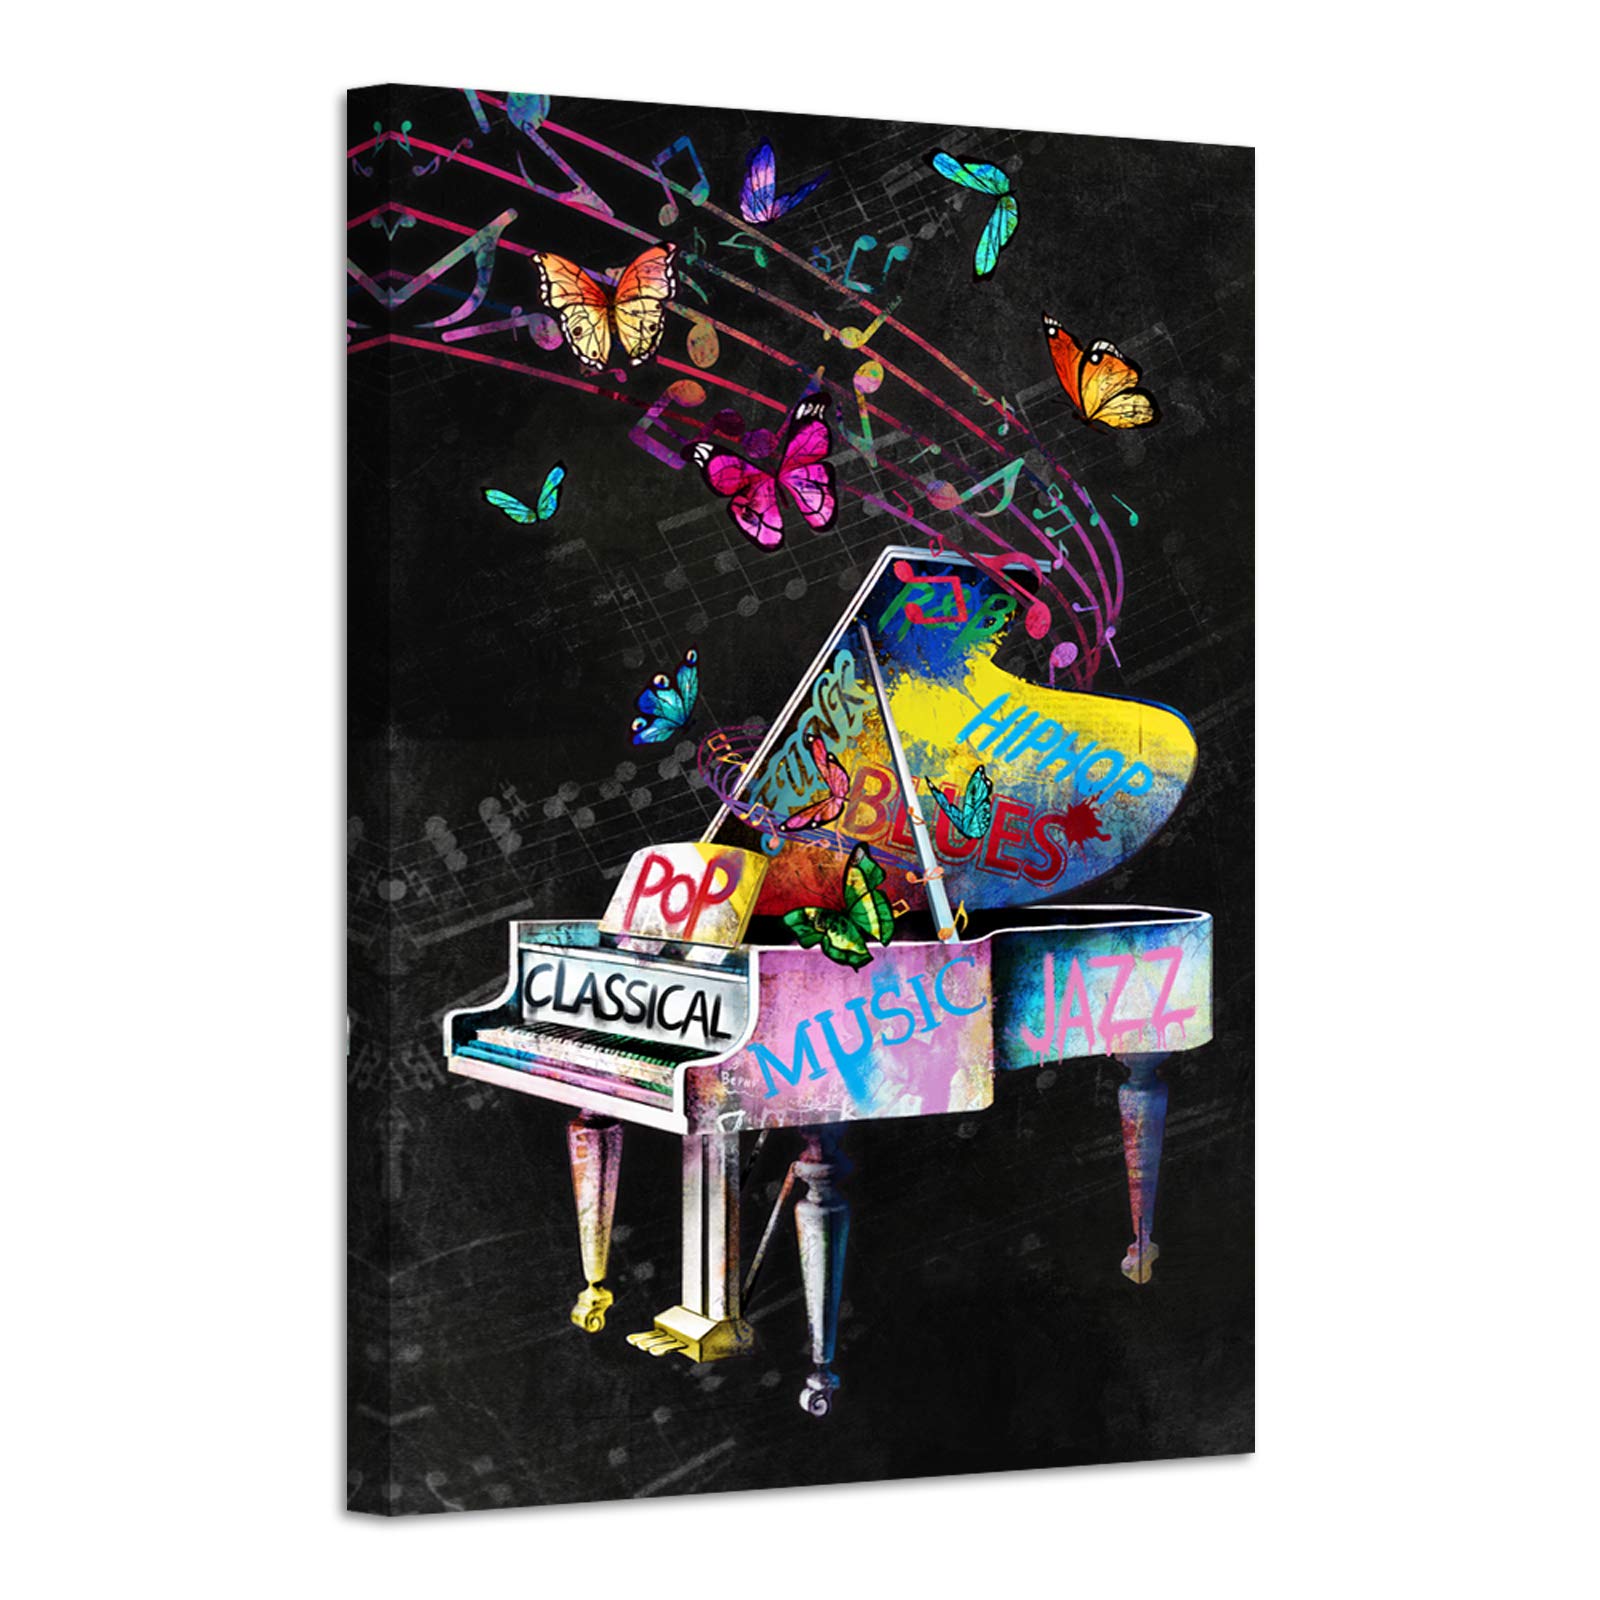 LevvArts Piano Wall Art Decor Grunge Graffiti Painting Canvas Pictures Artwork Pop Music Poster Art Prints for Home Bedroom Room Decorations 24x36inch